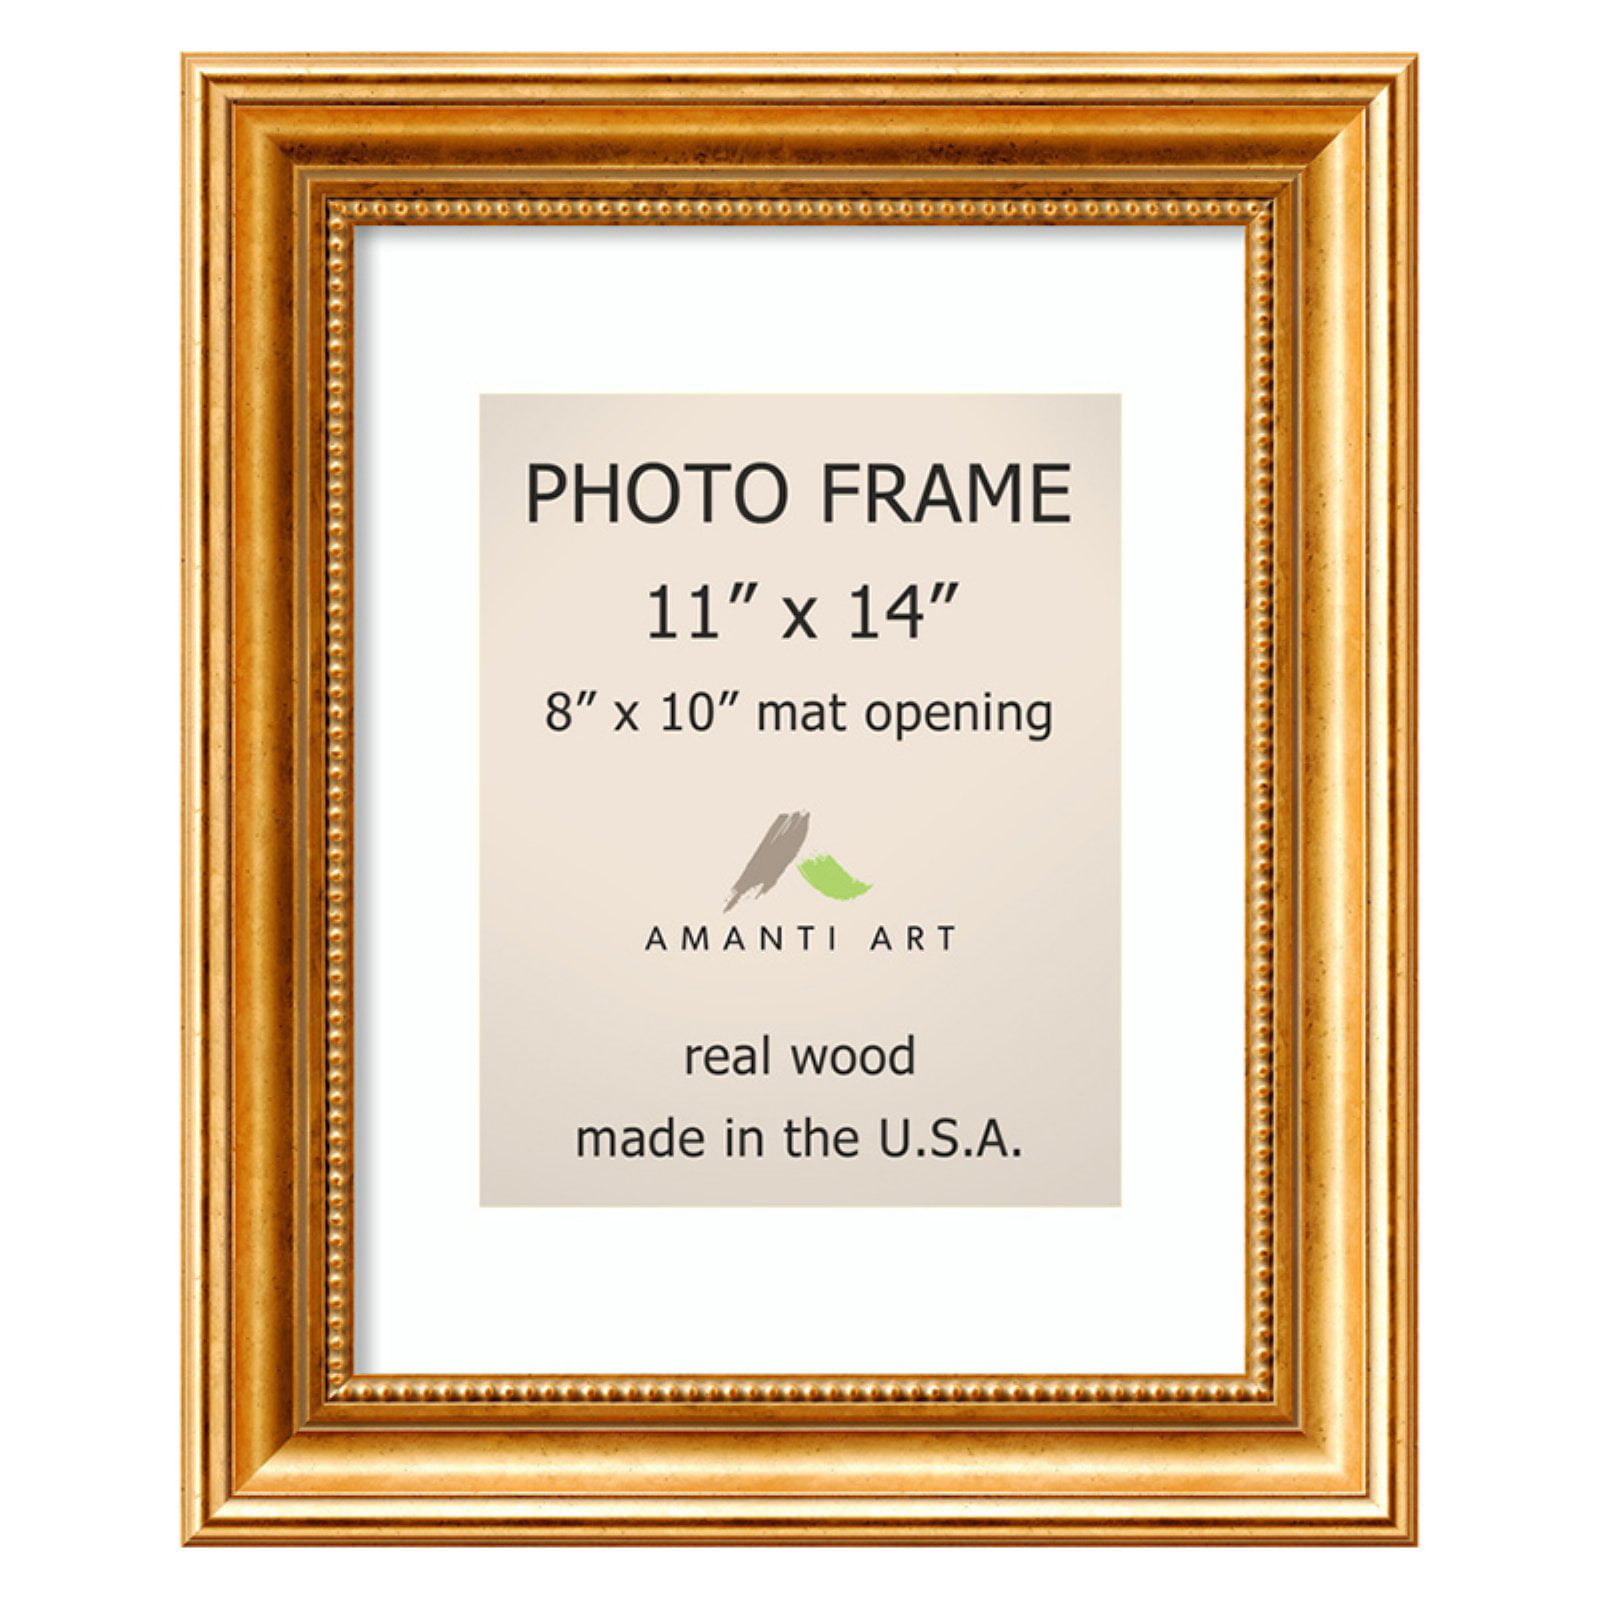 Details about   8.5x11 Black Gallery Certificate and Document Frame Wide Molding Includes... 